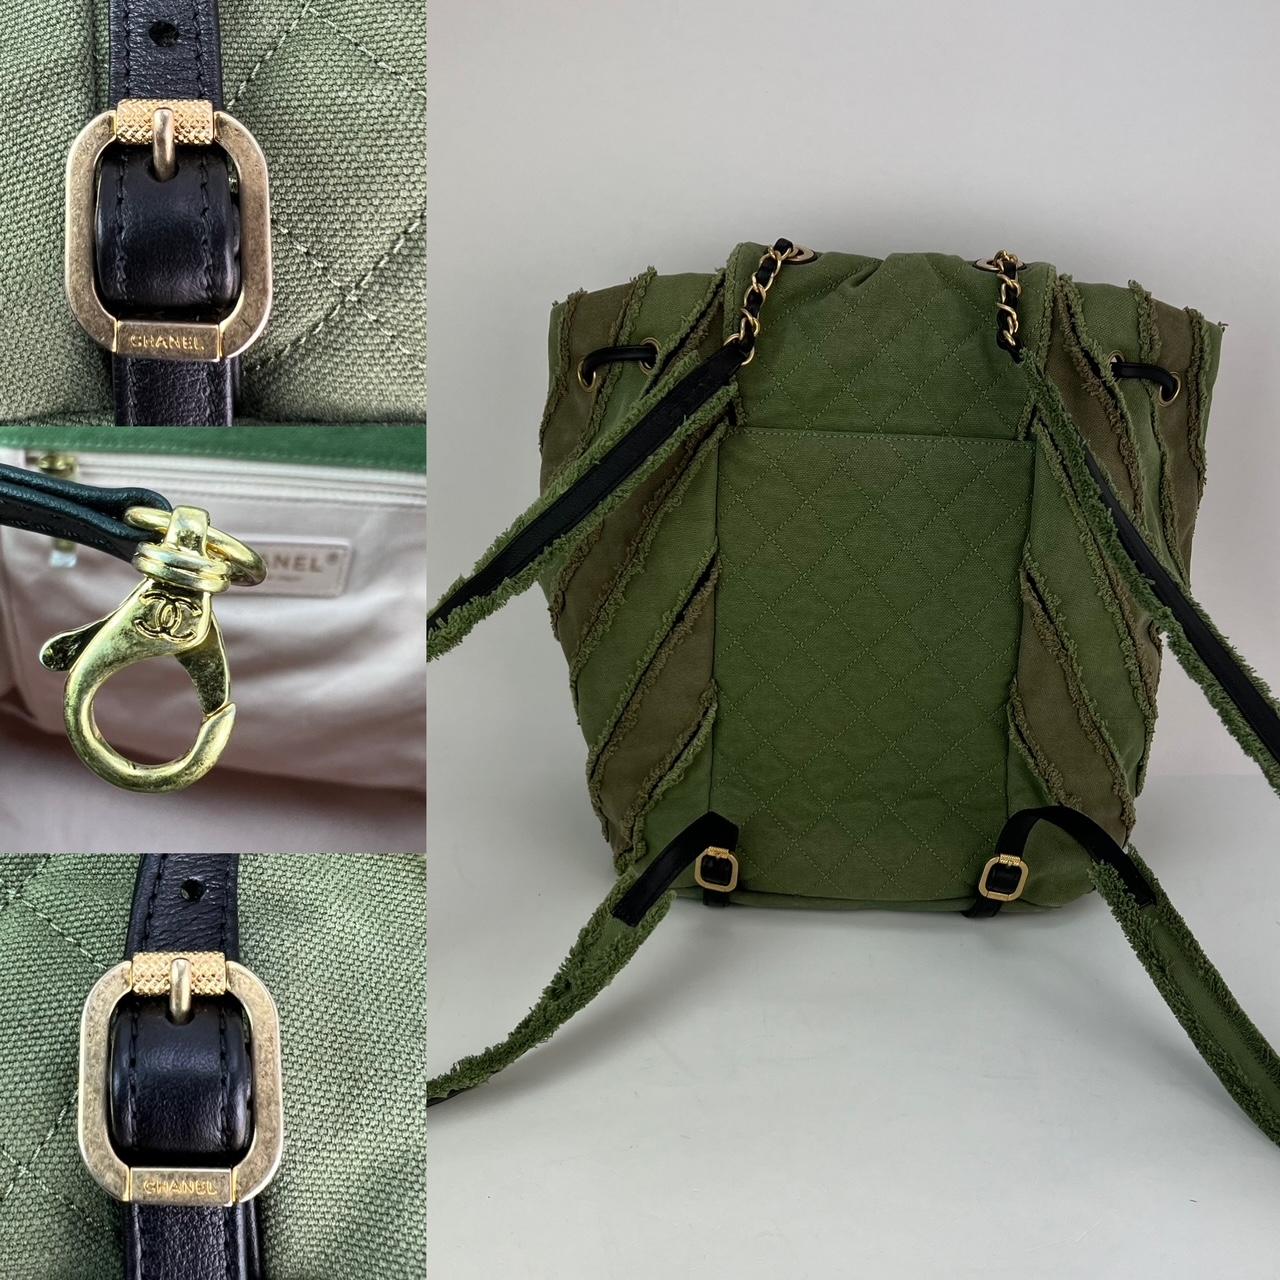 Pre-Owned  100% Authentic
CHANEL Cruise Coco Cuba Collection Chevron Patchwork Khaki Green Backpack
RATING: A/B...Very Good, well maintained, 
shows minor signs of wear
MATERIAL: canvas, leather
STRAPS: adjustable canvas and leather
adjustable up to